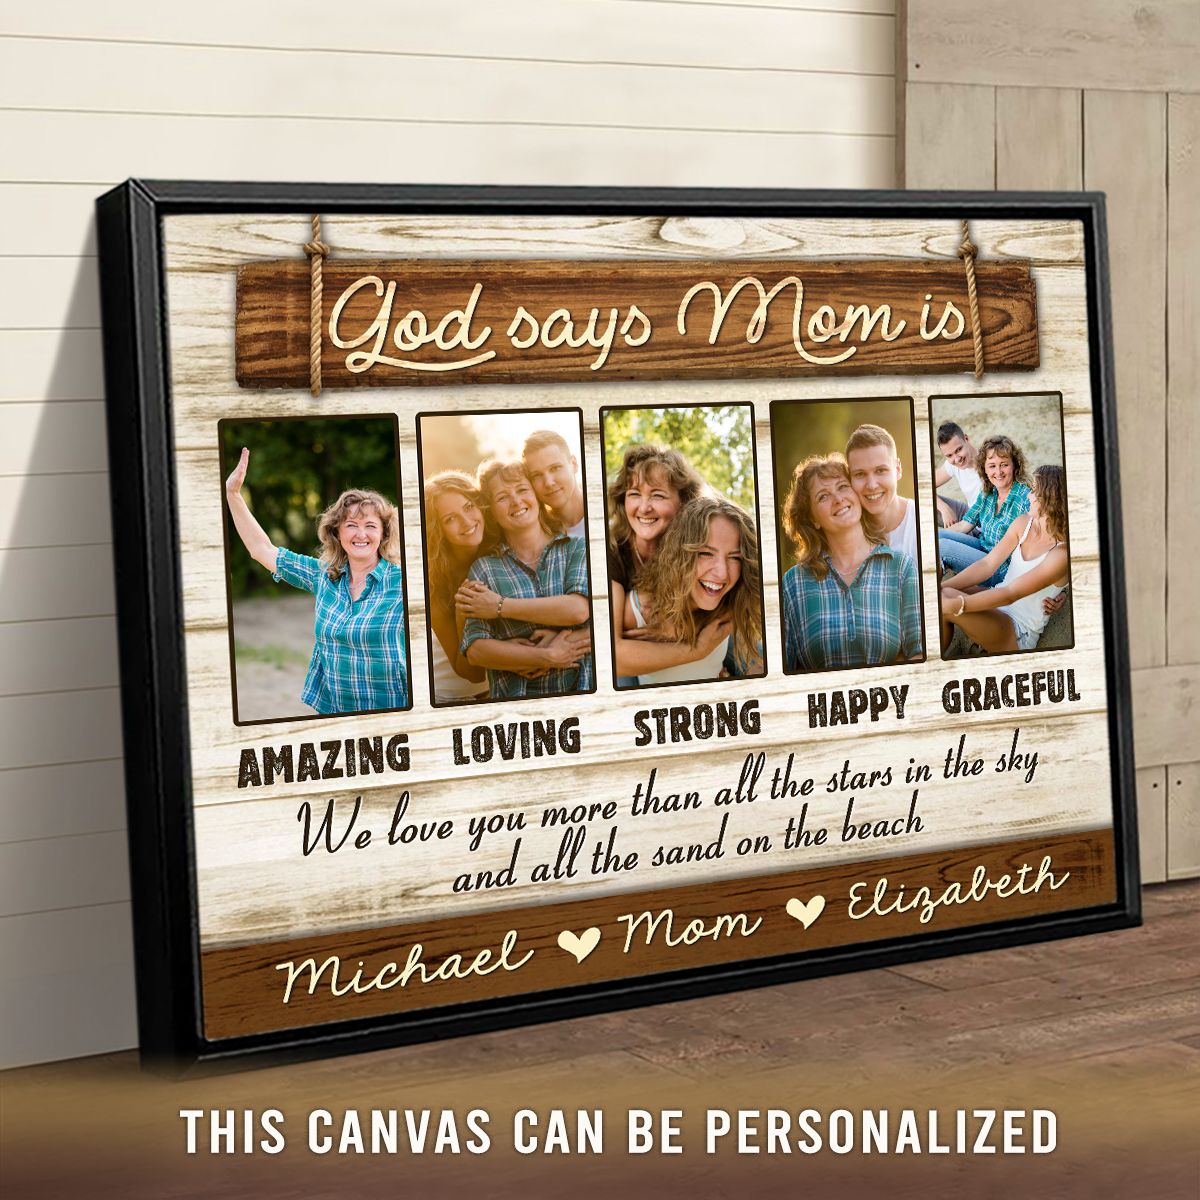 https://images.ohcanvas.com/ohcanvas_com/2022/03/07015206/awesome-mothers-day-ideas-personalized-photo-and-names-canvas-print03.jpg